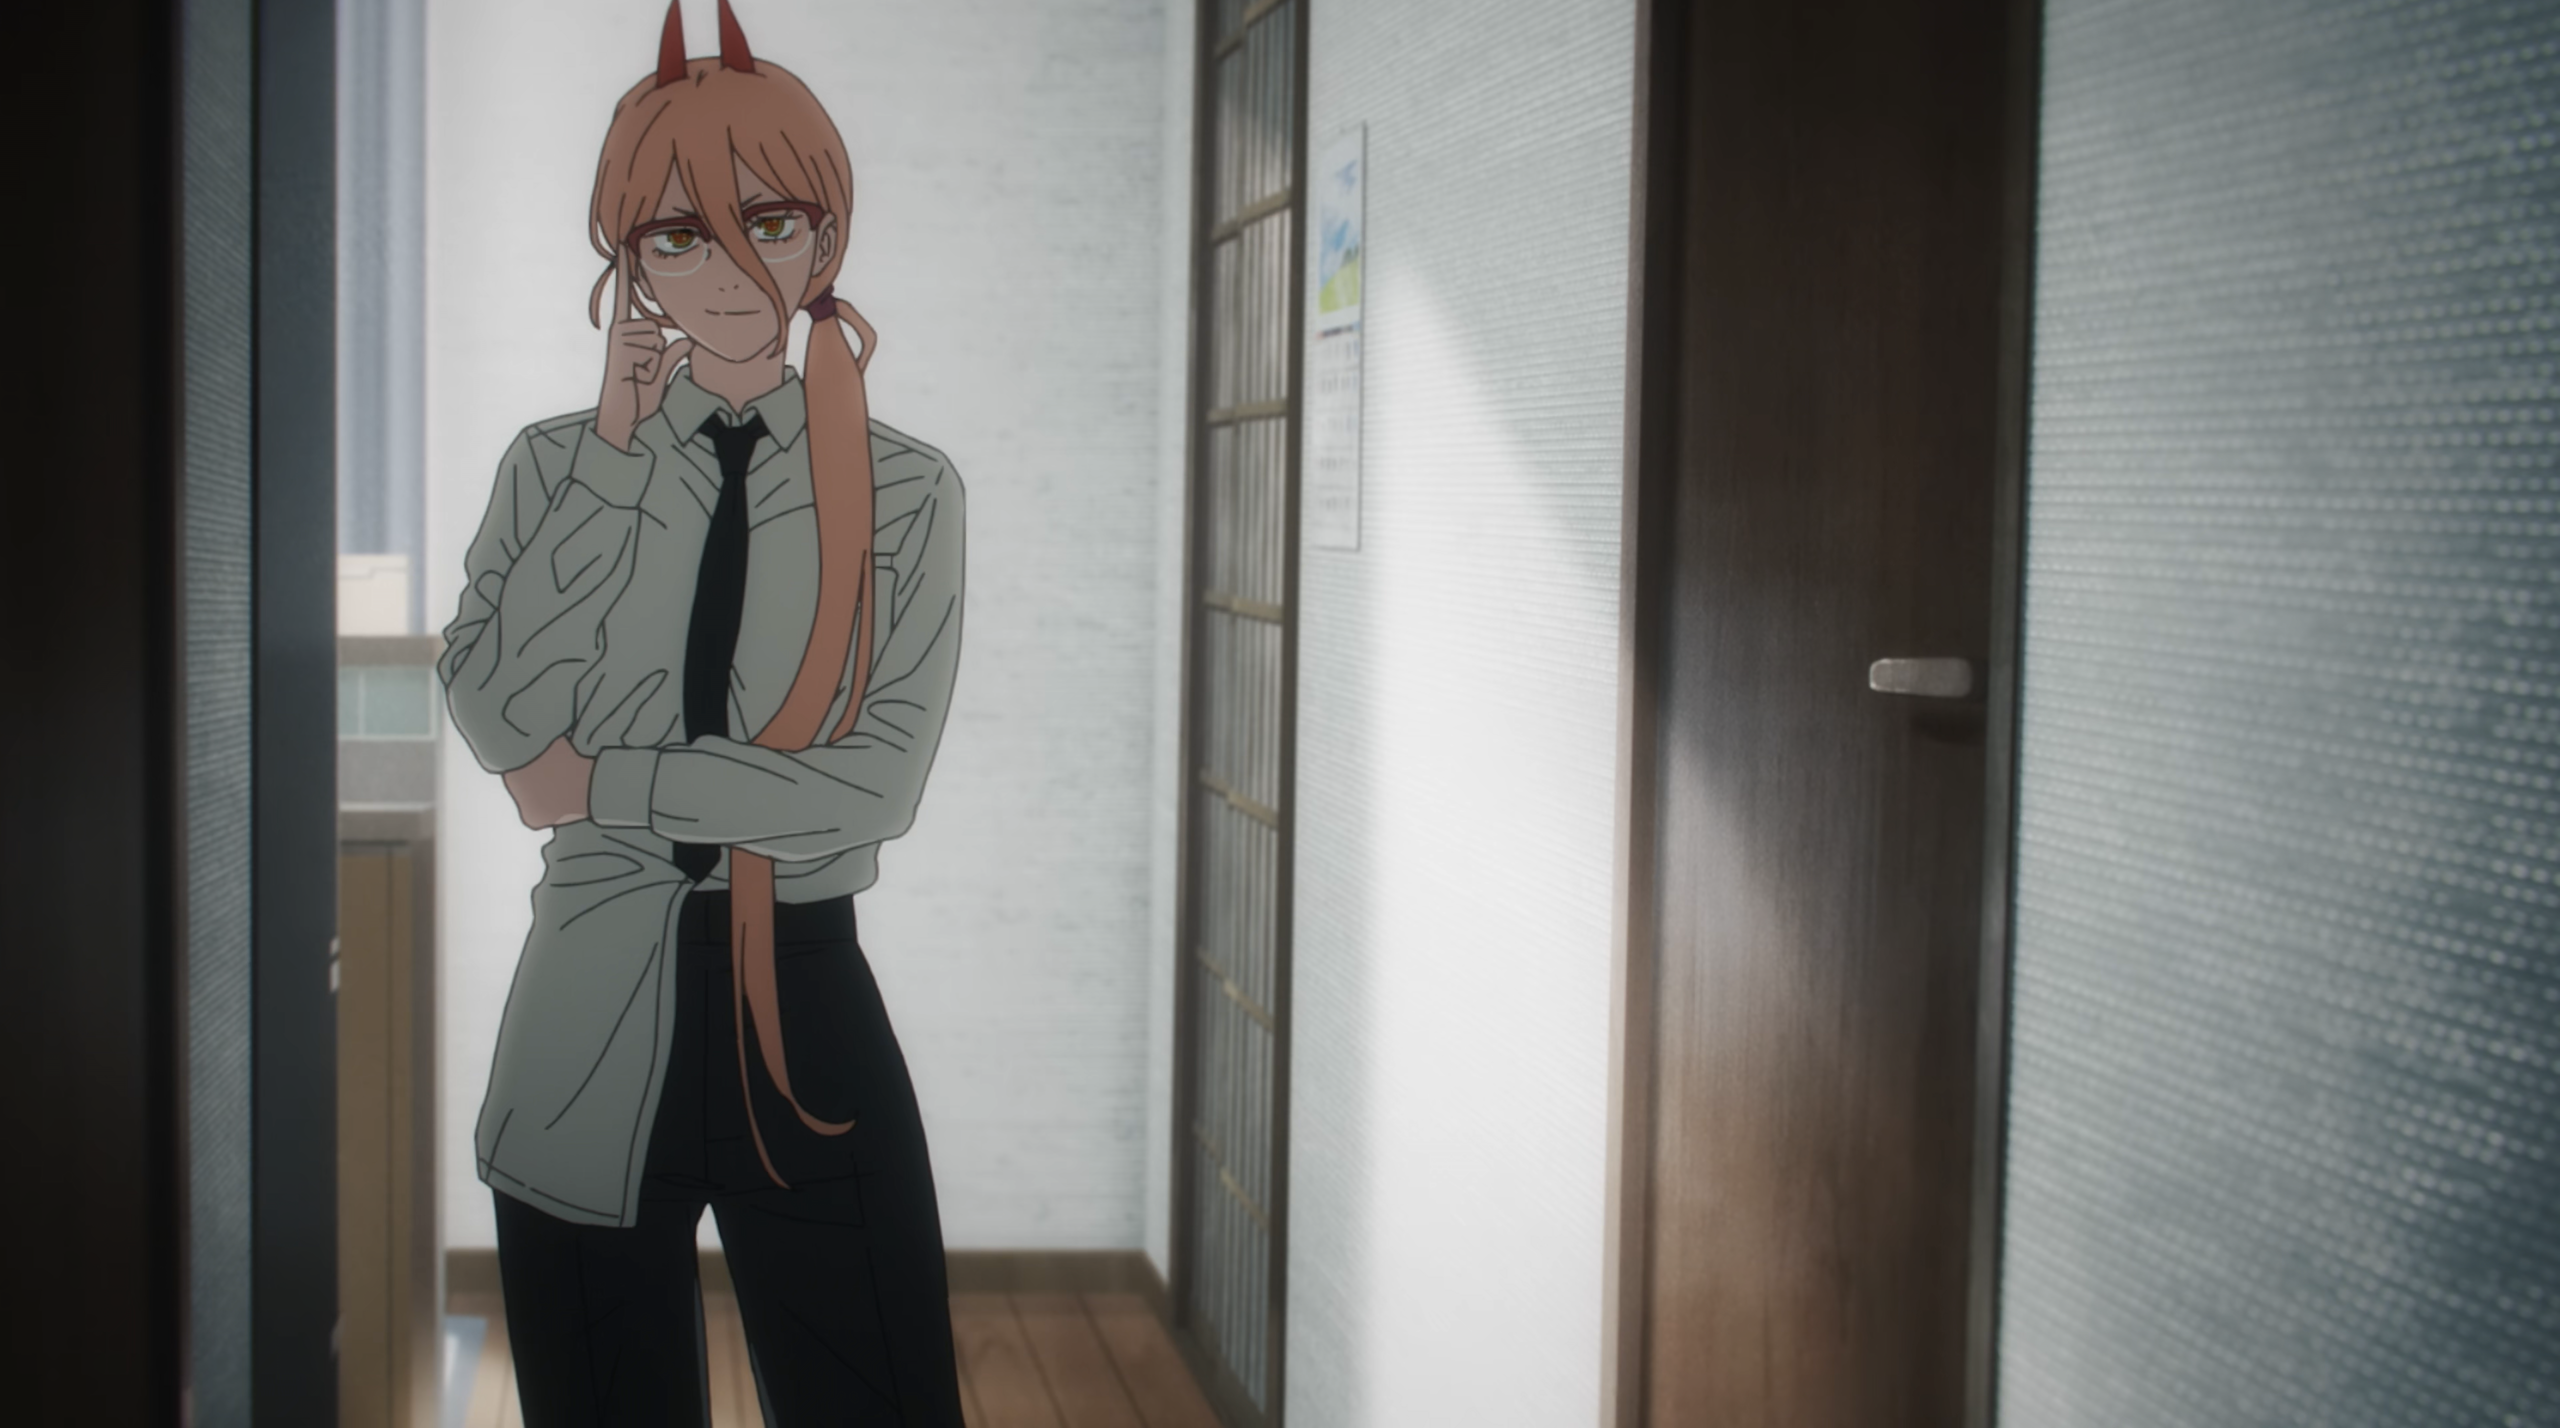 Chainsaw Man episode 12: Katana Man arc ends with a glimpse of